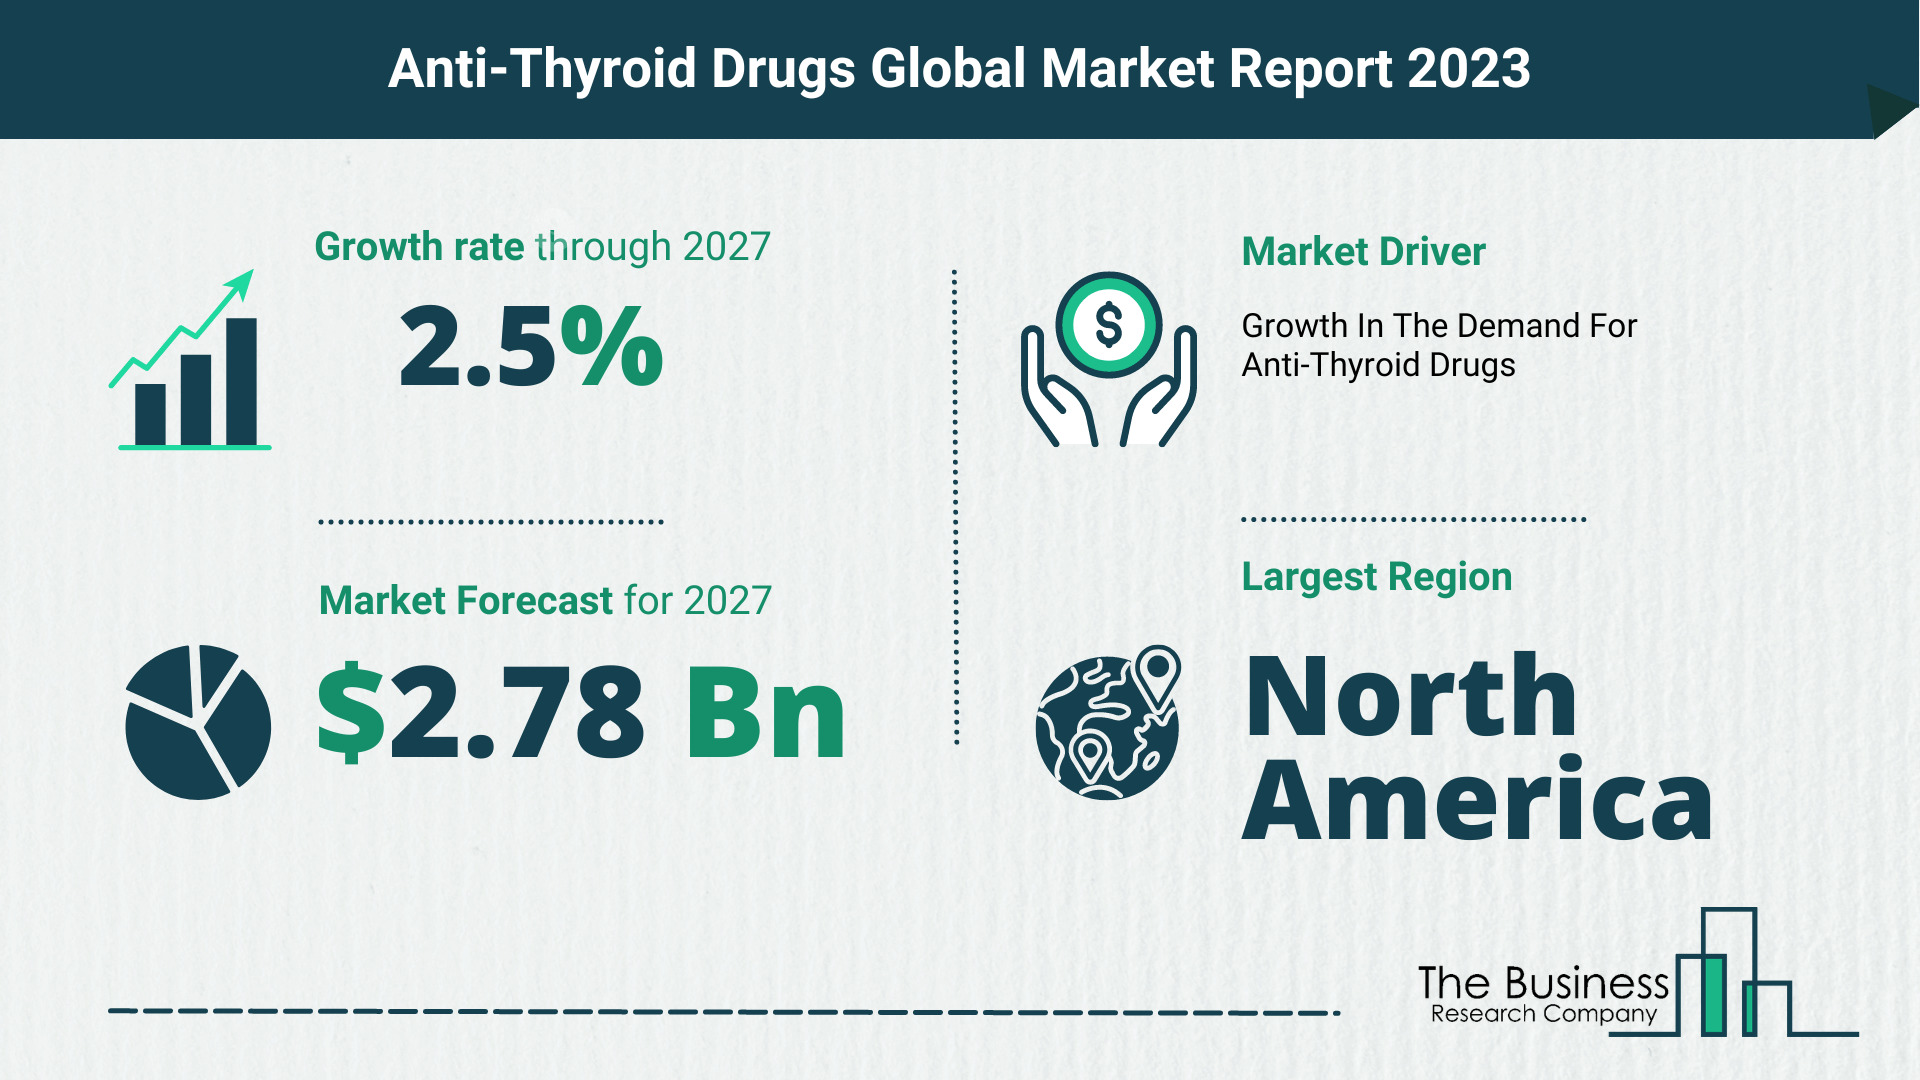 Anti-Thyroid Drugs Market Forecast 2023-2027 By The Business Research Company